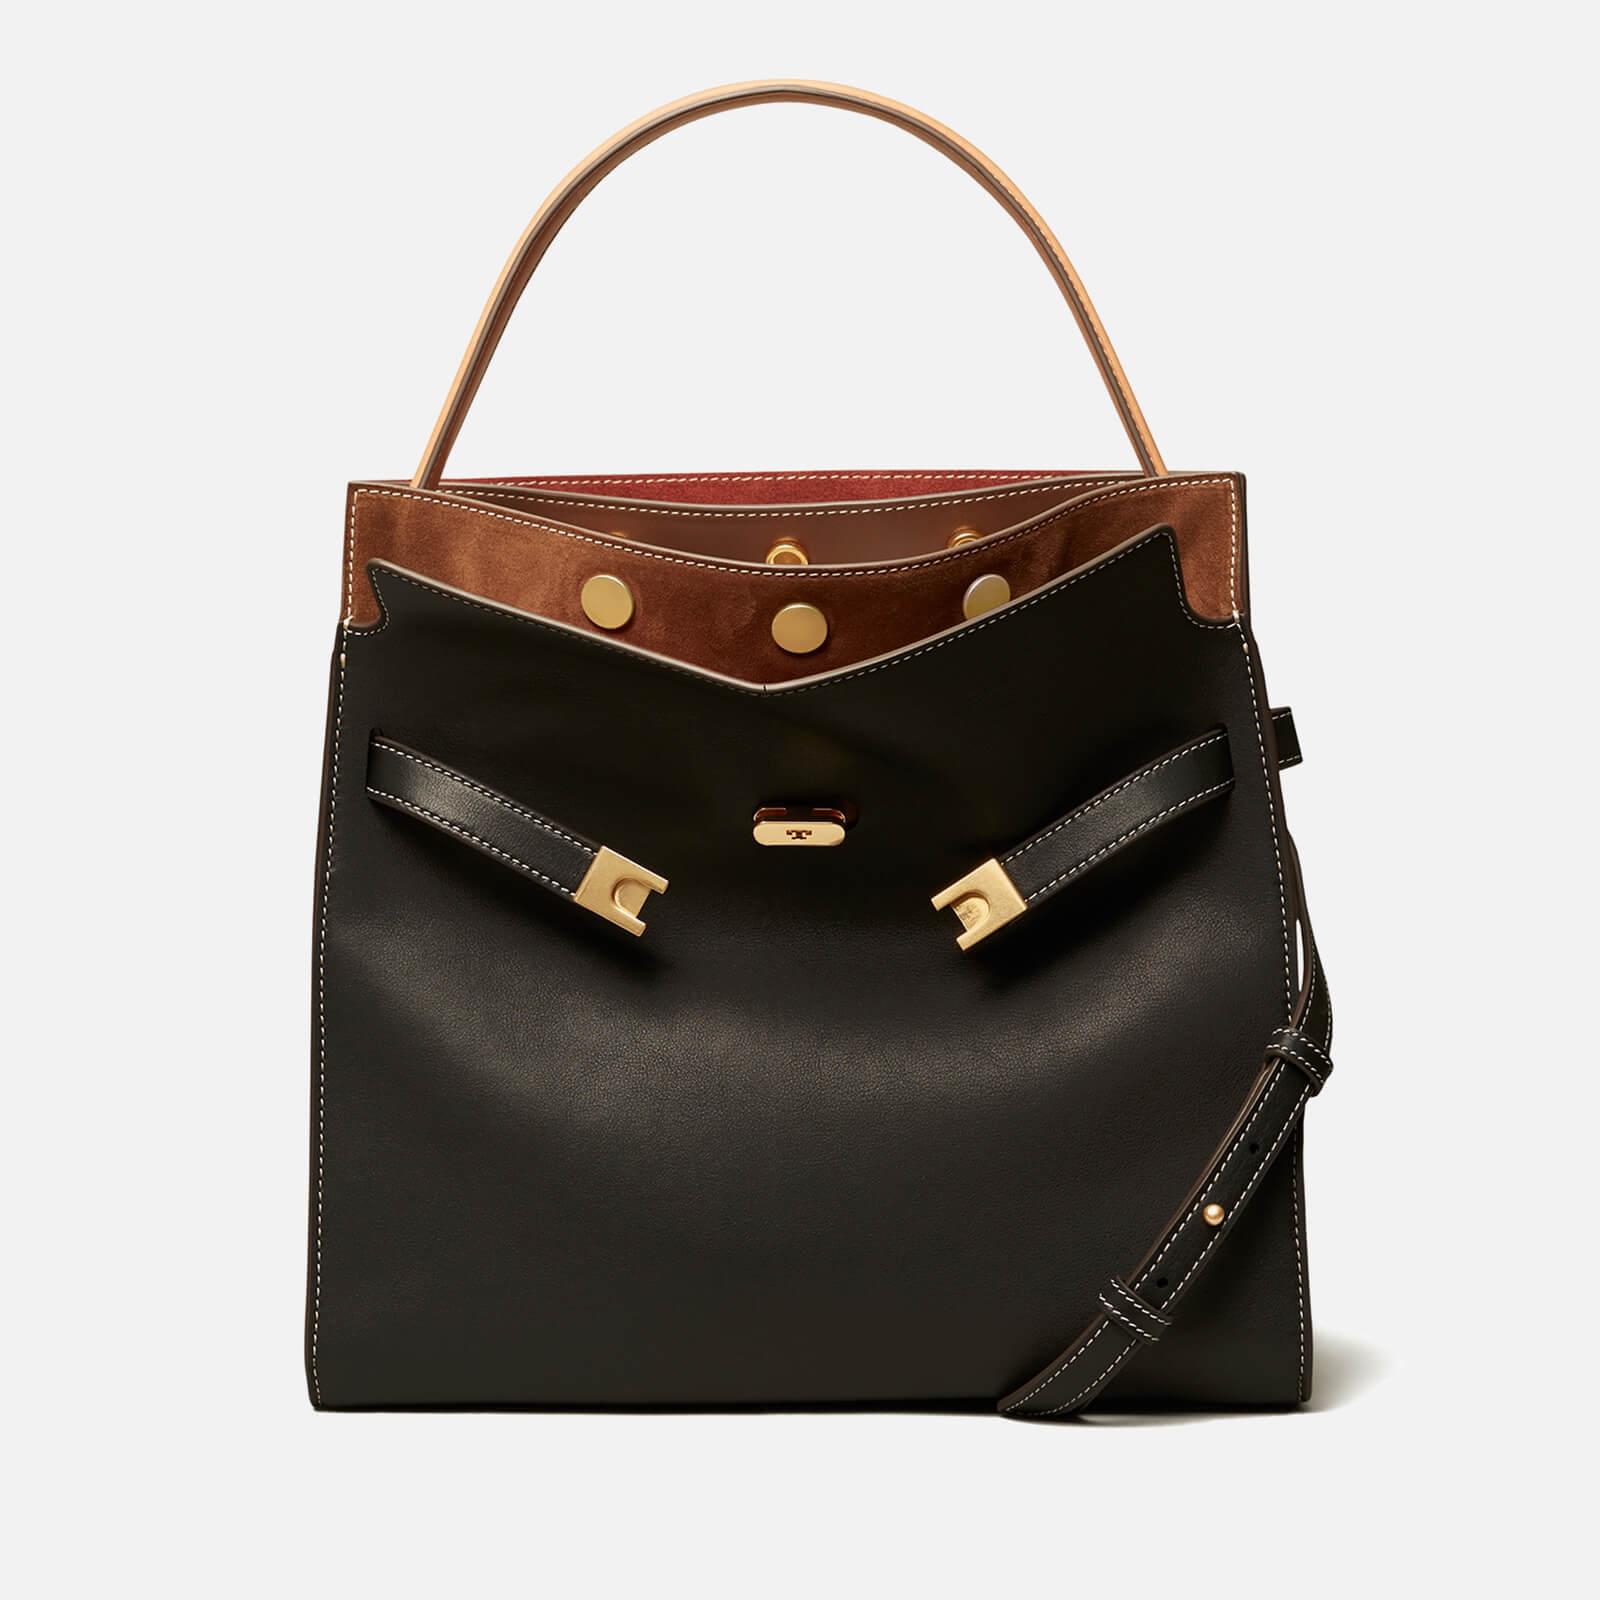 Tory Burch Lee Radziwill Double Leather And Suede Bag in Black | Lyst